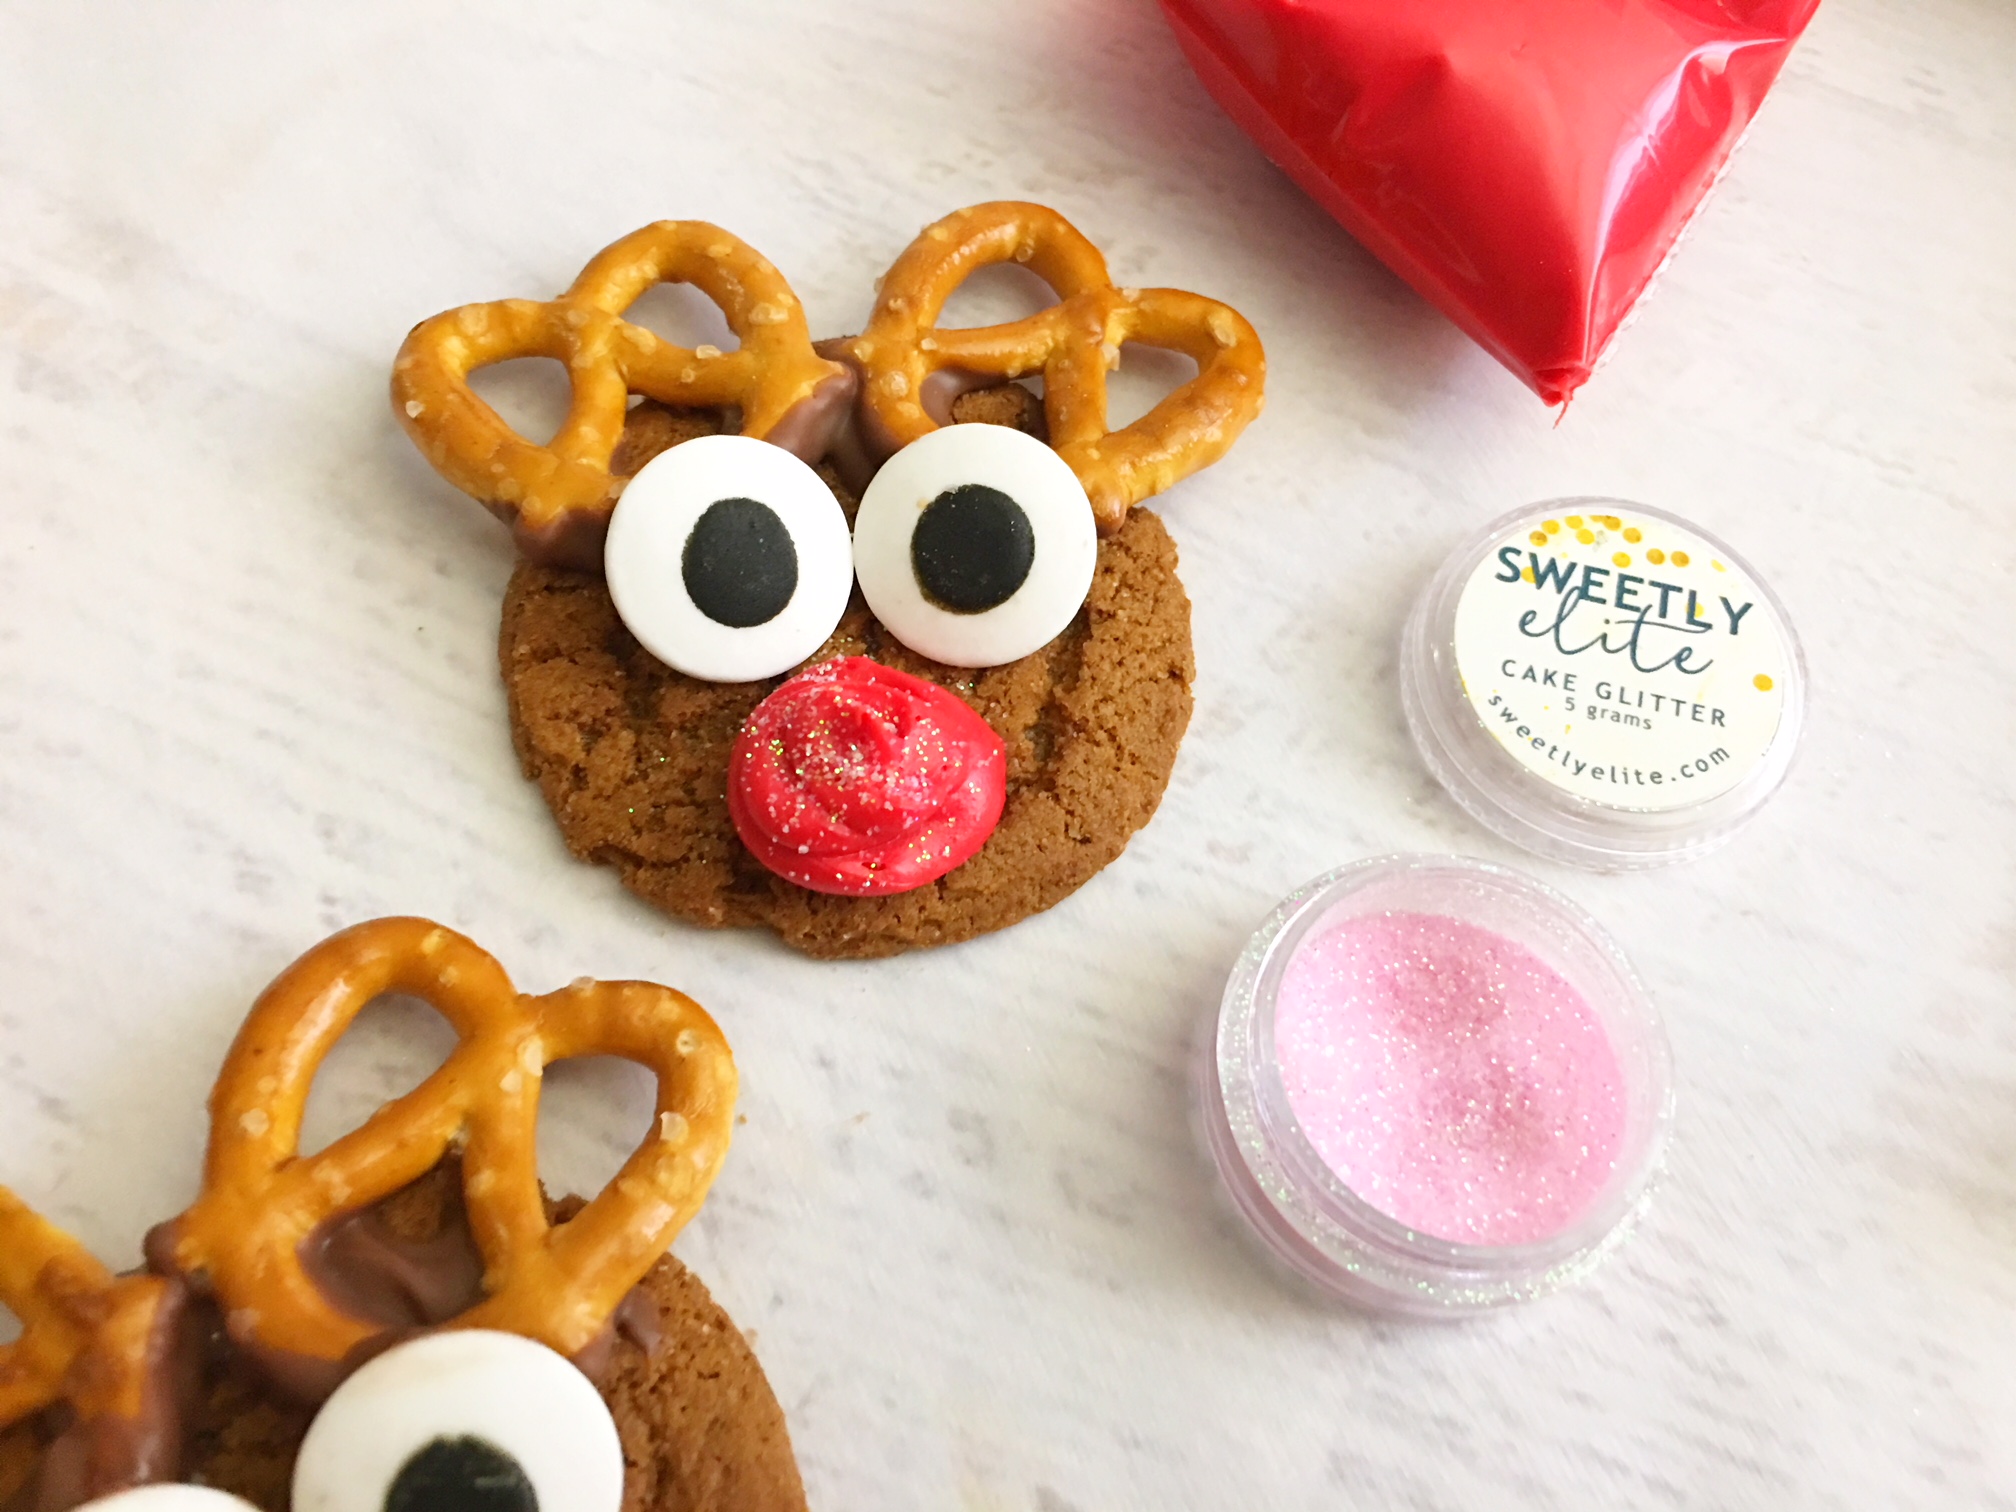 These adorable Gingersnap Reindeer Cookies are the perfect way to celebrate the Holiday Season and even better to gift to family and friends!